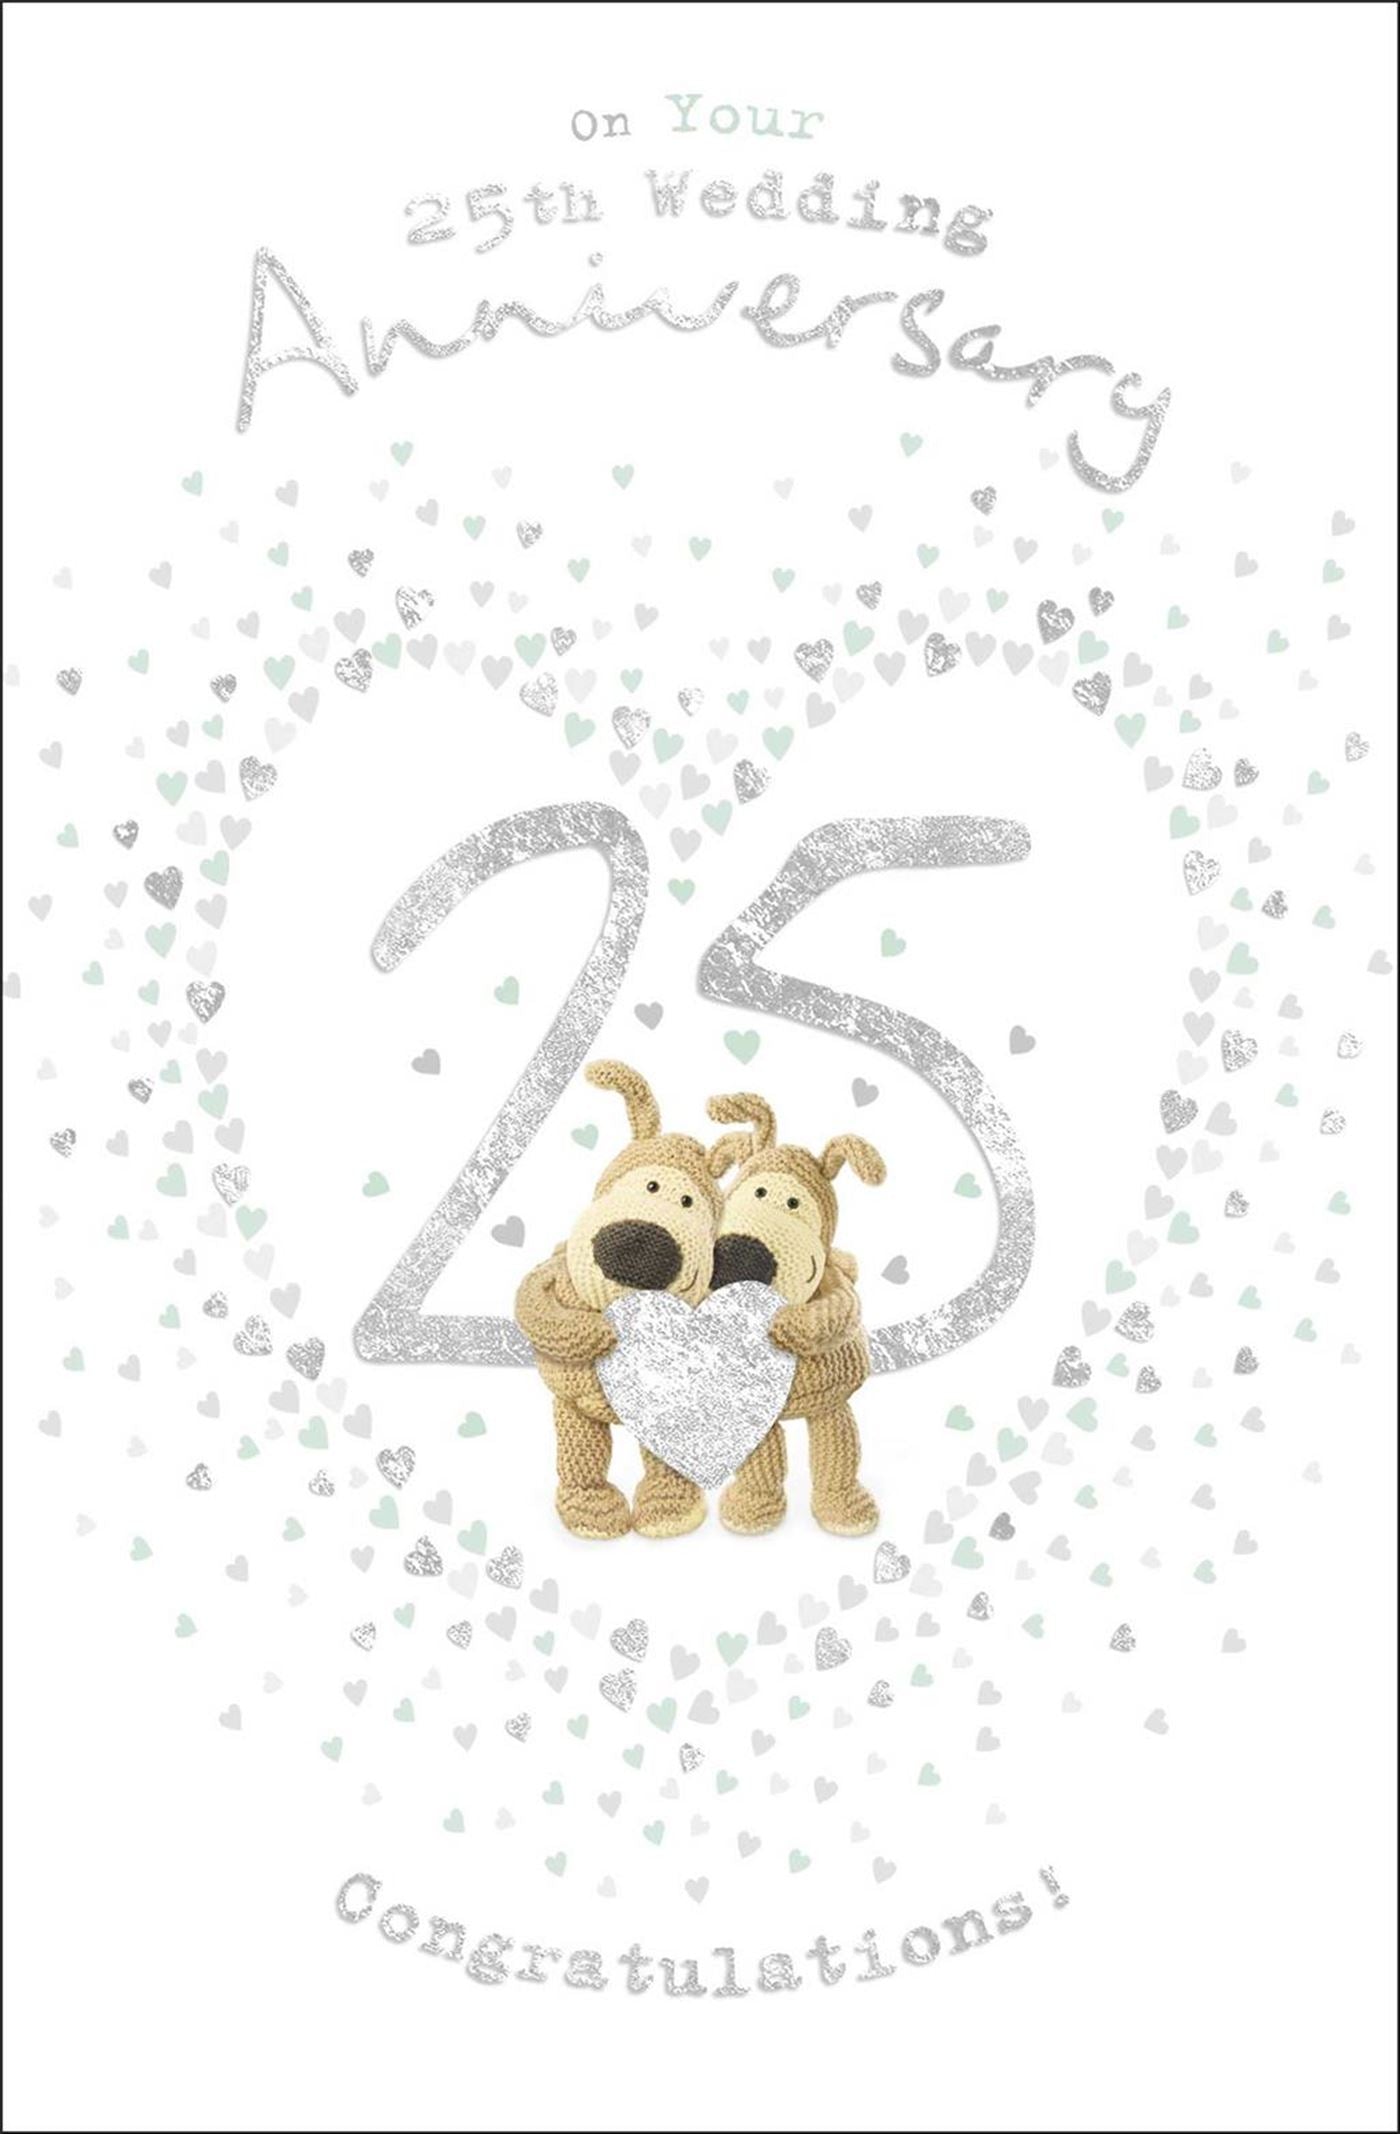 Front of Anniversary 25th Teddies Congratulations Greetings Card